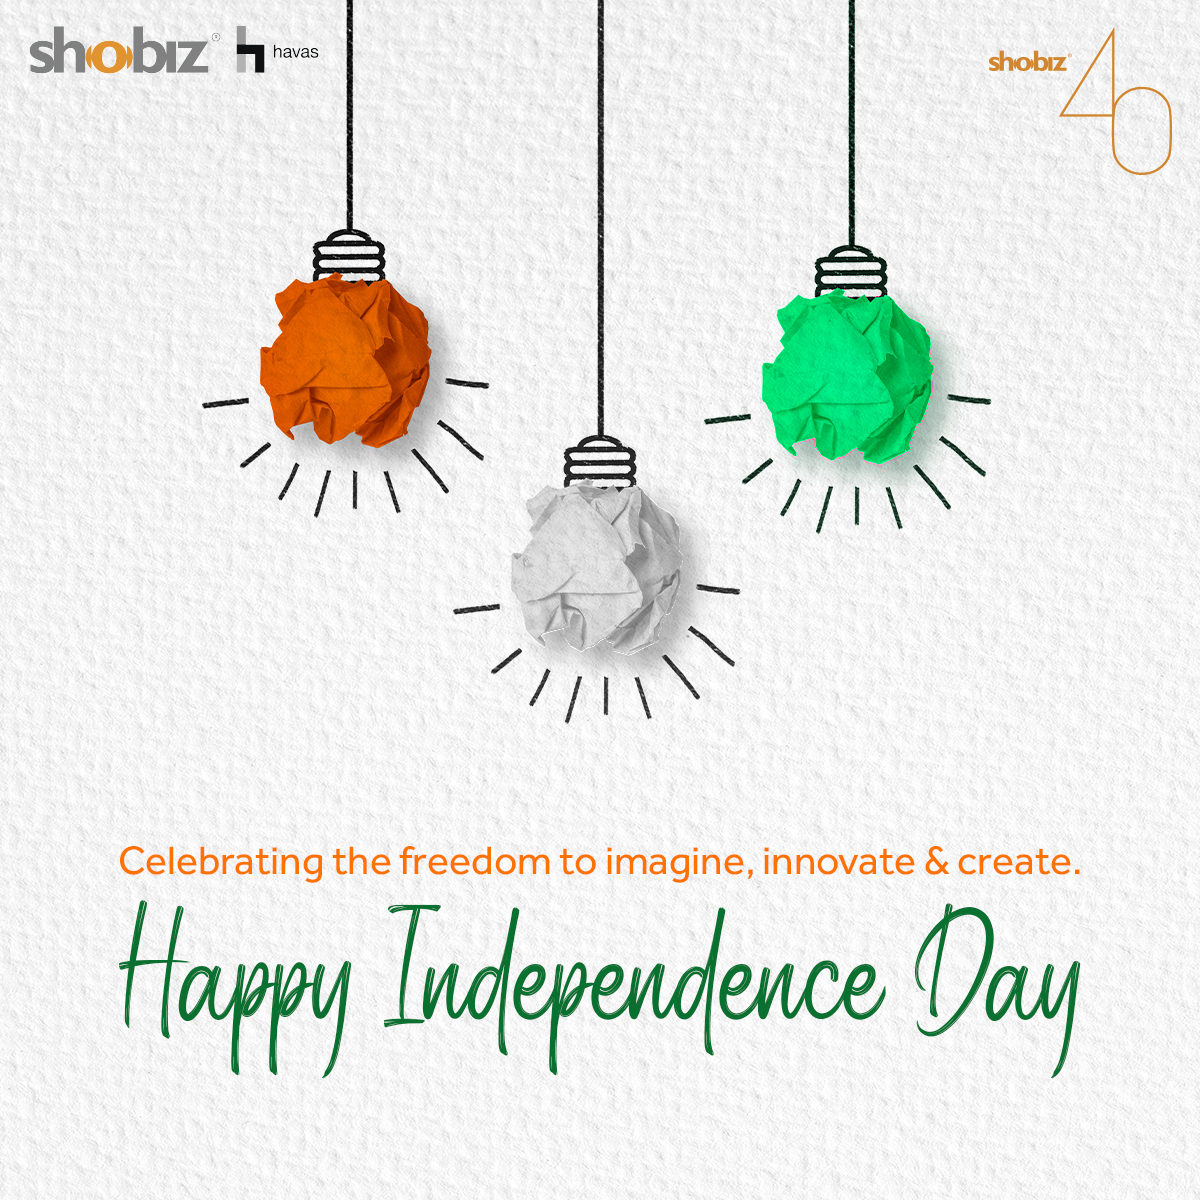 What we are experiencing today is a result of a ground breaking idea. Happy Independence Day! @tobaccowala @HavasGroupIN . . #Shobiz #ExperientialCompany #EventProfs #IndependenceDay #IndependenceDay2022 #75thYearOfFreedom #StillGoingStrong #ProudIndian